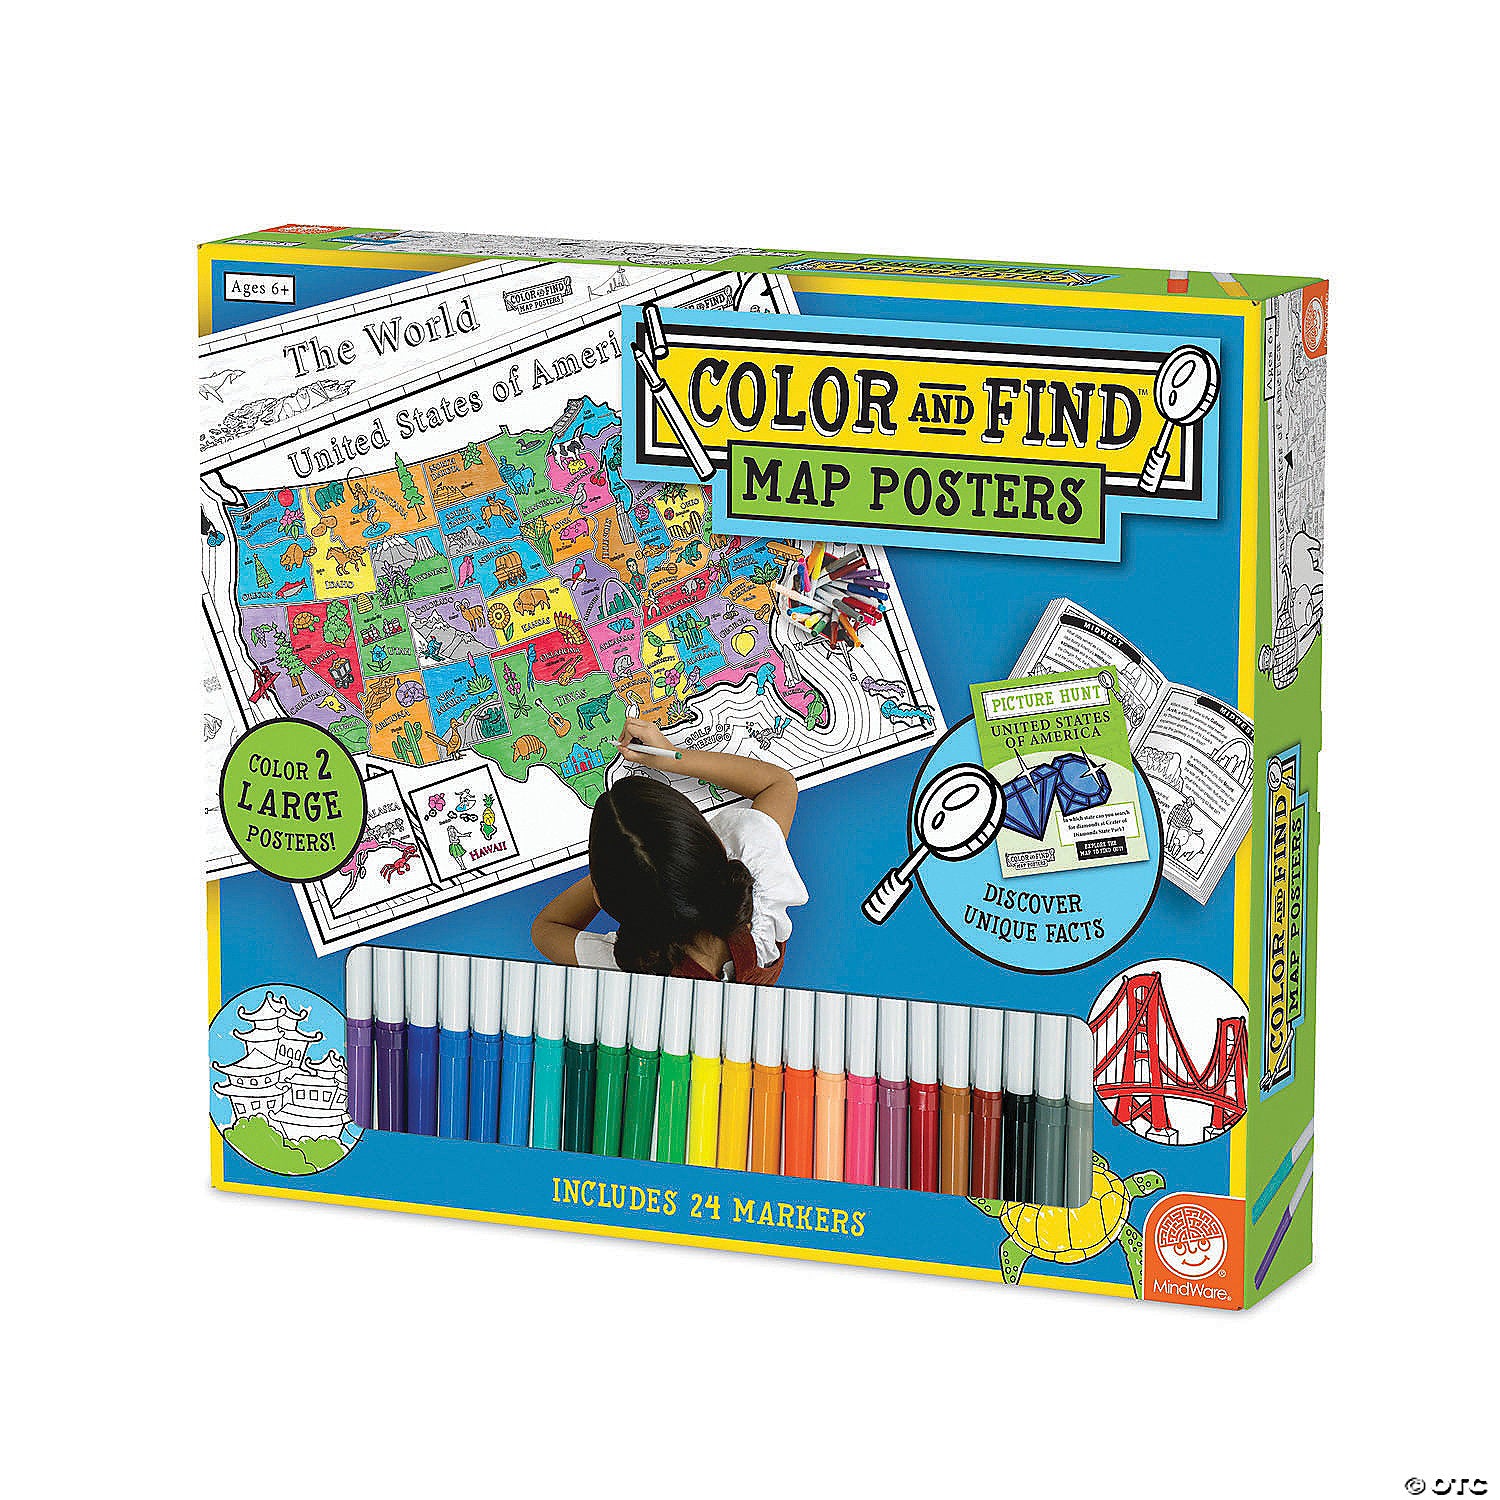 Color and Find Map Posters by Mindware #14090579QP5221